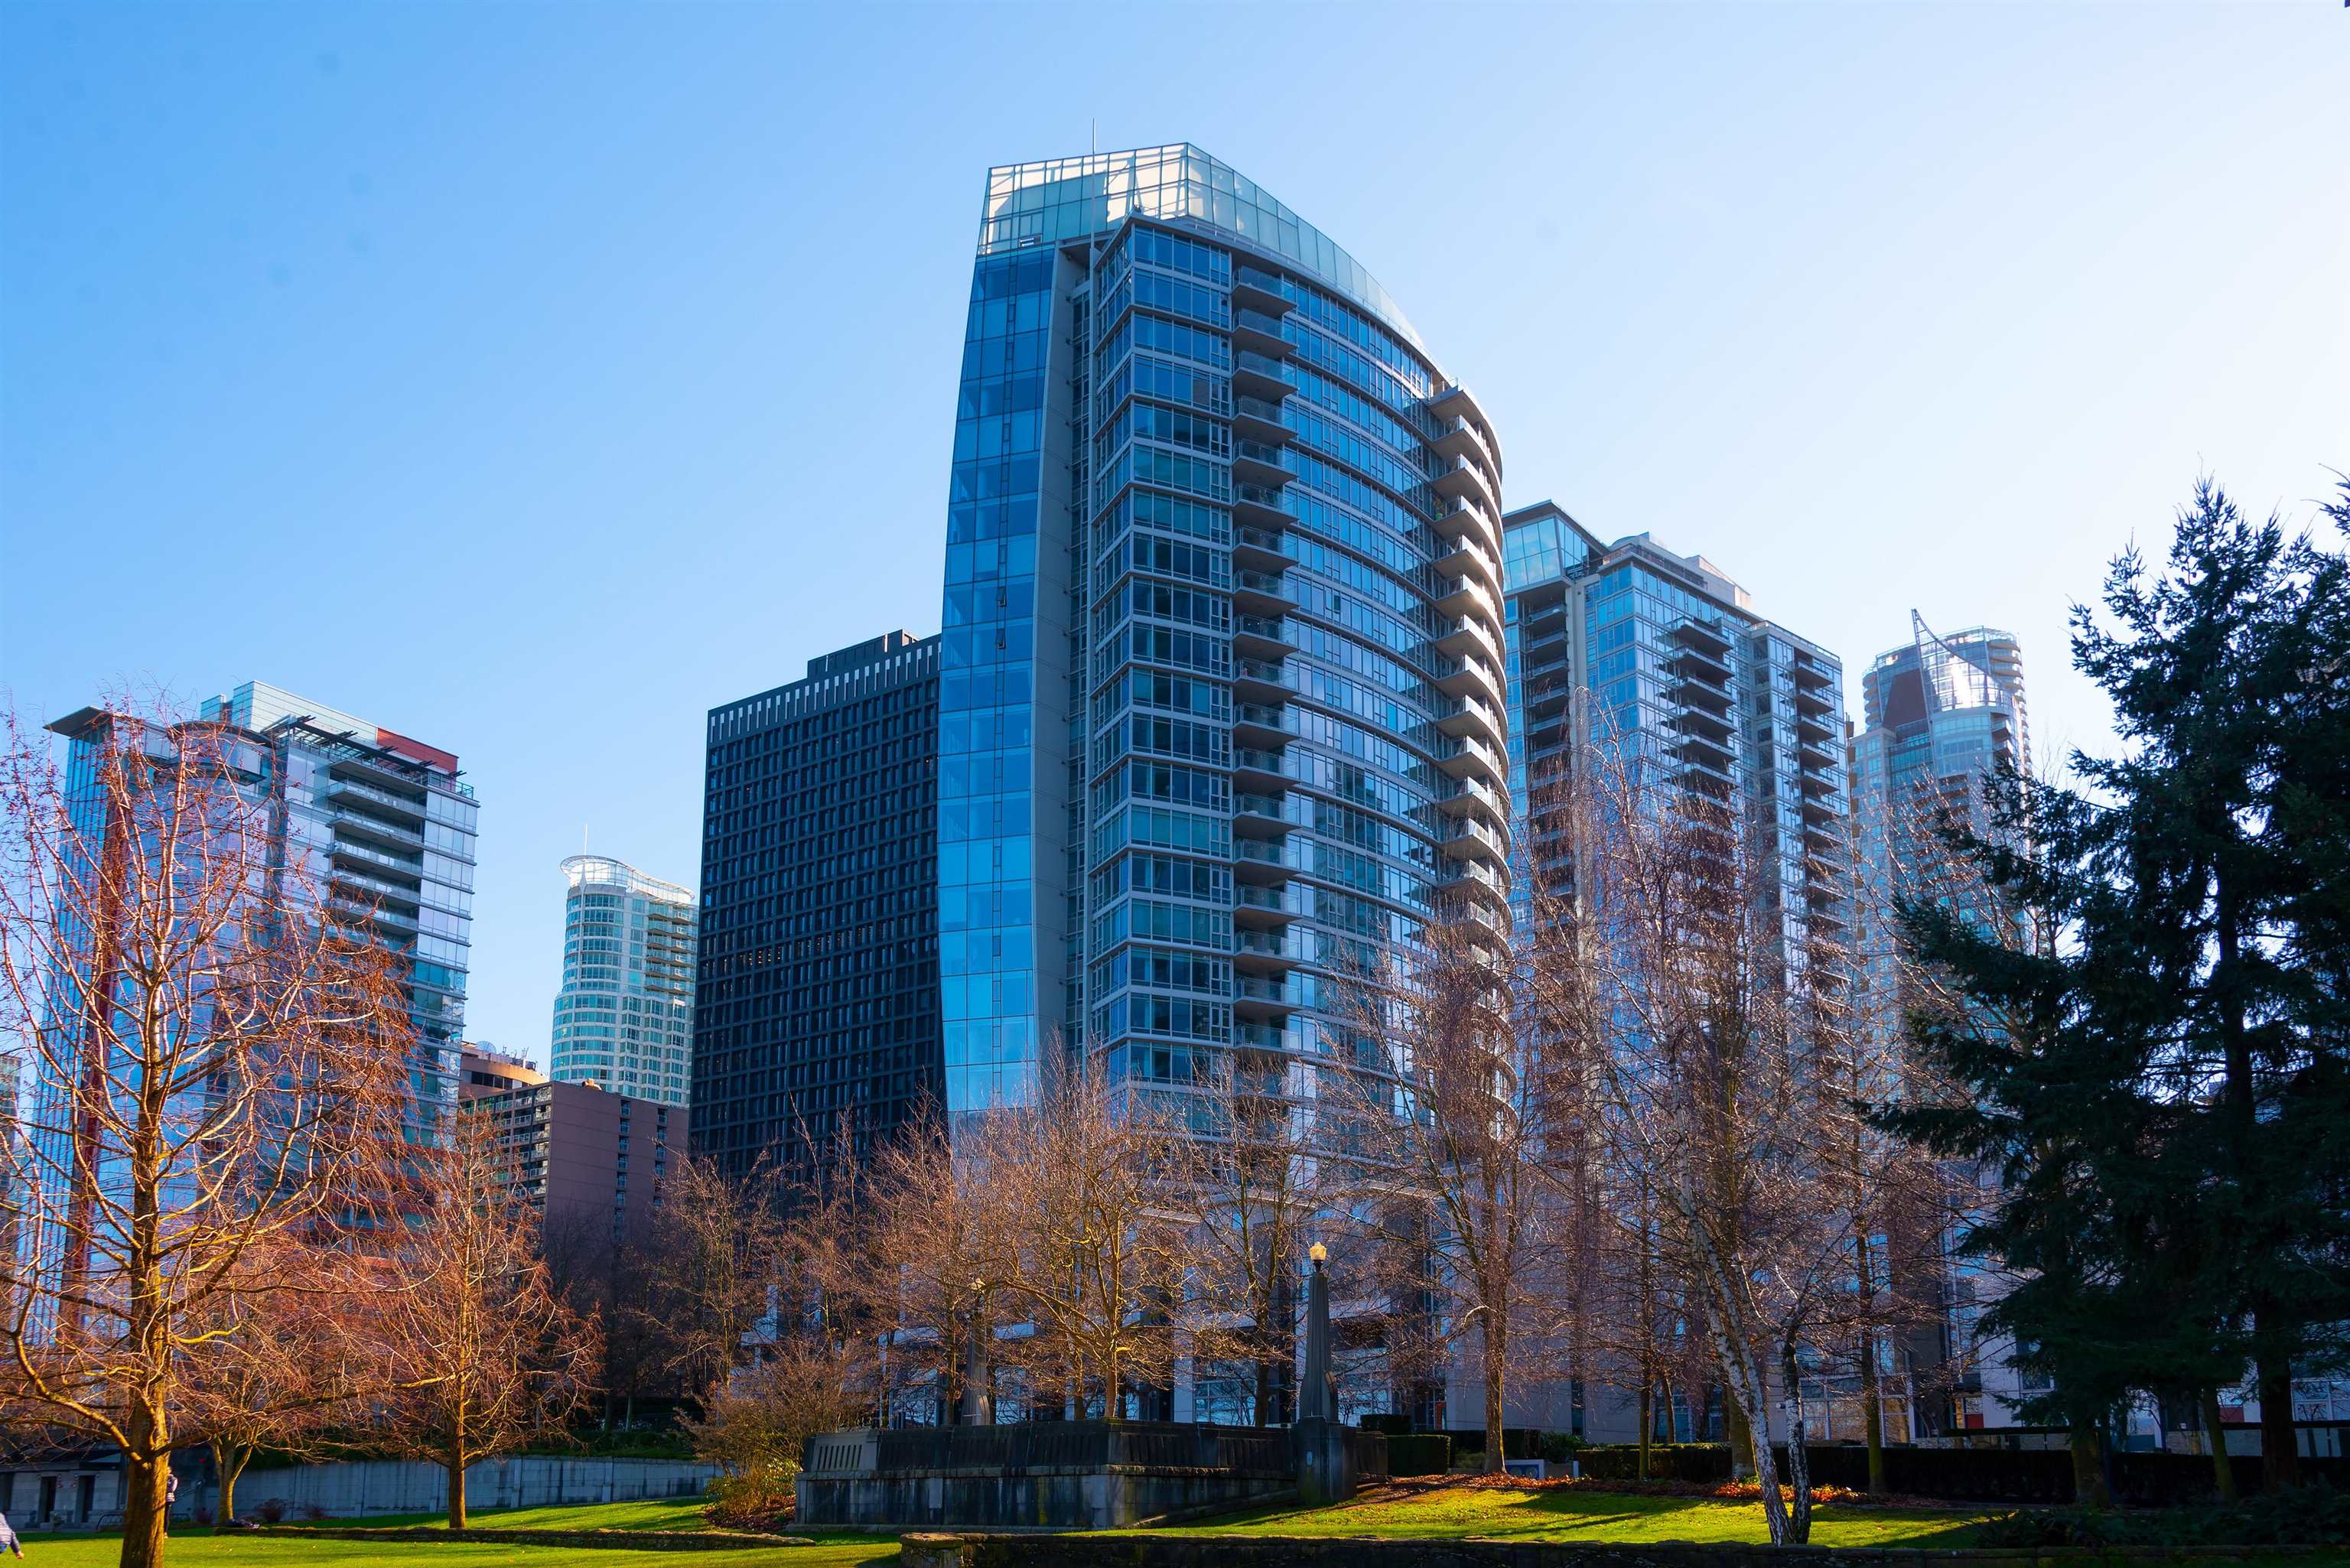 Coal Harbour Apartment/Condo for sale:  2 bedroom 1,240 sq.ft. (Listed 2022-10-14)